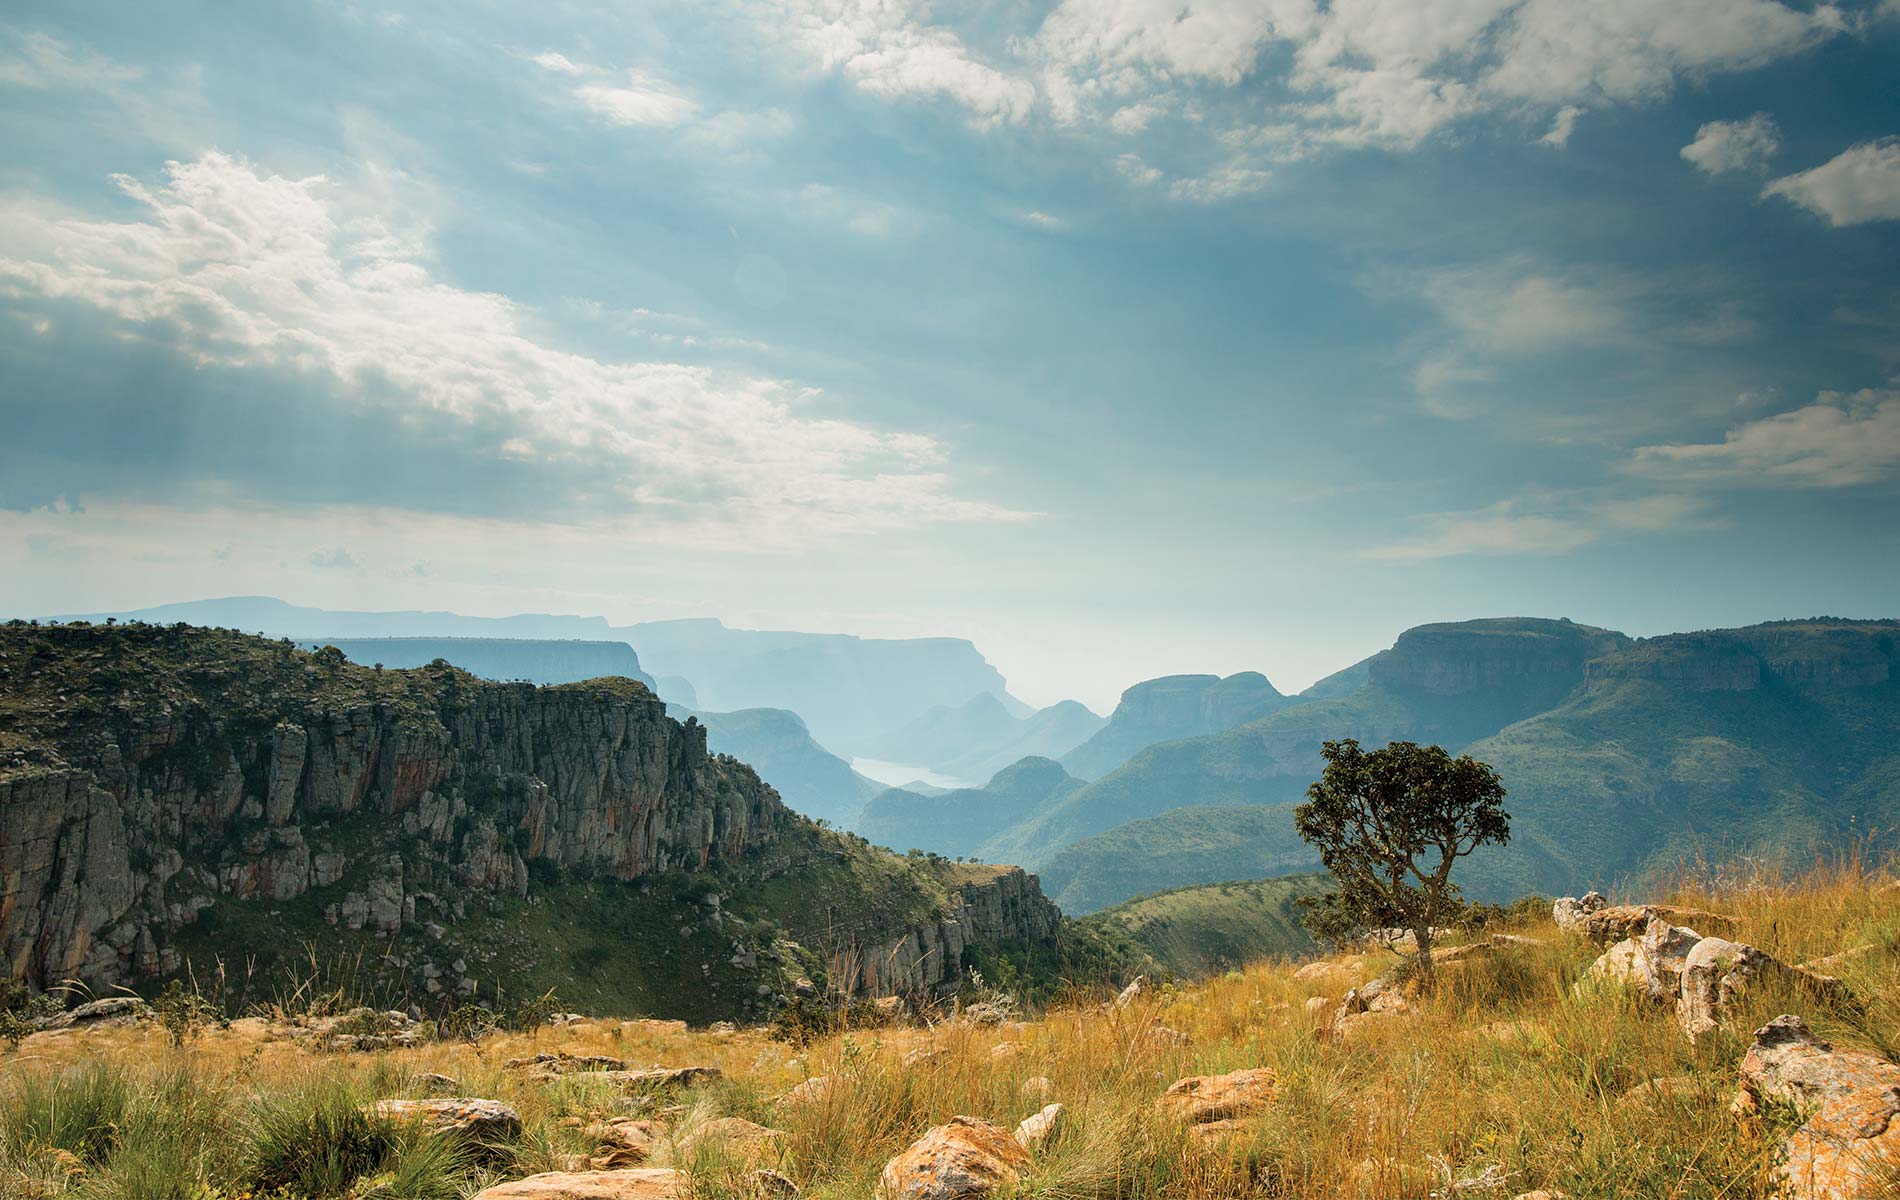 A sweeping view of the majestic Blyde River Canyon in Mpumalanga, South Africa